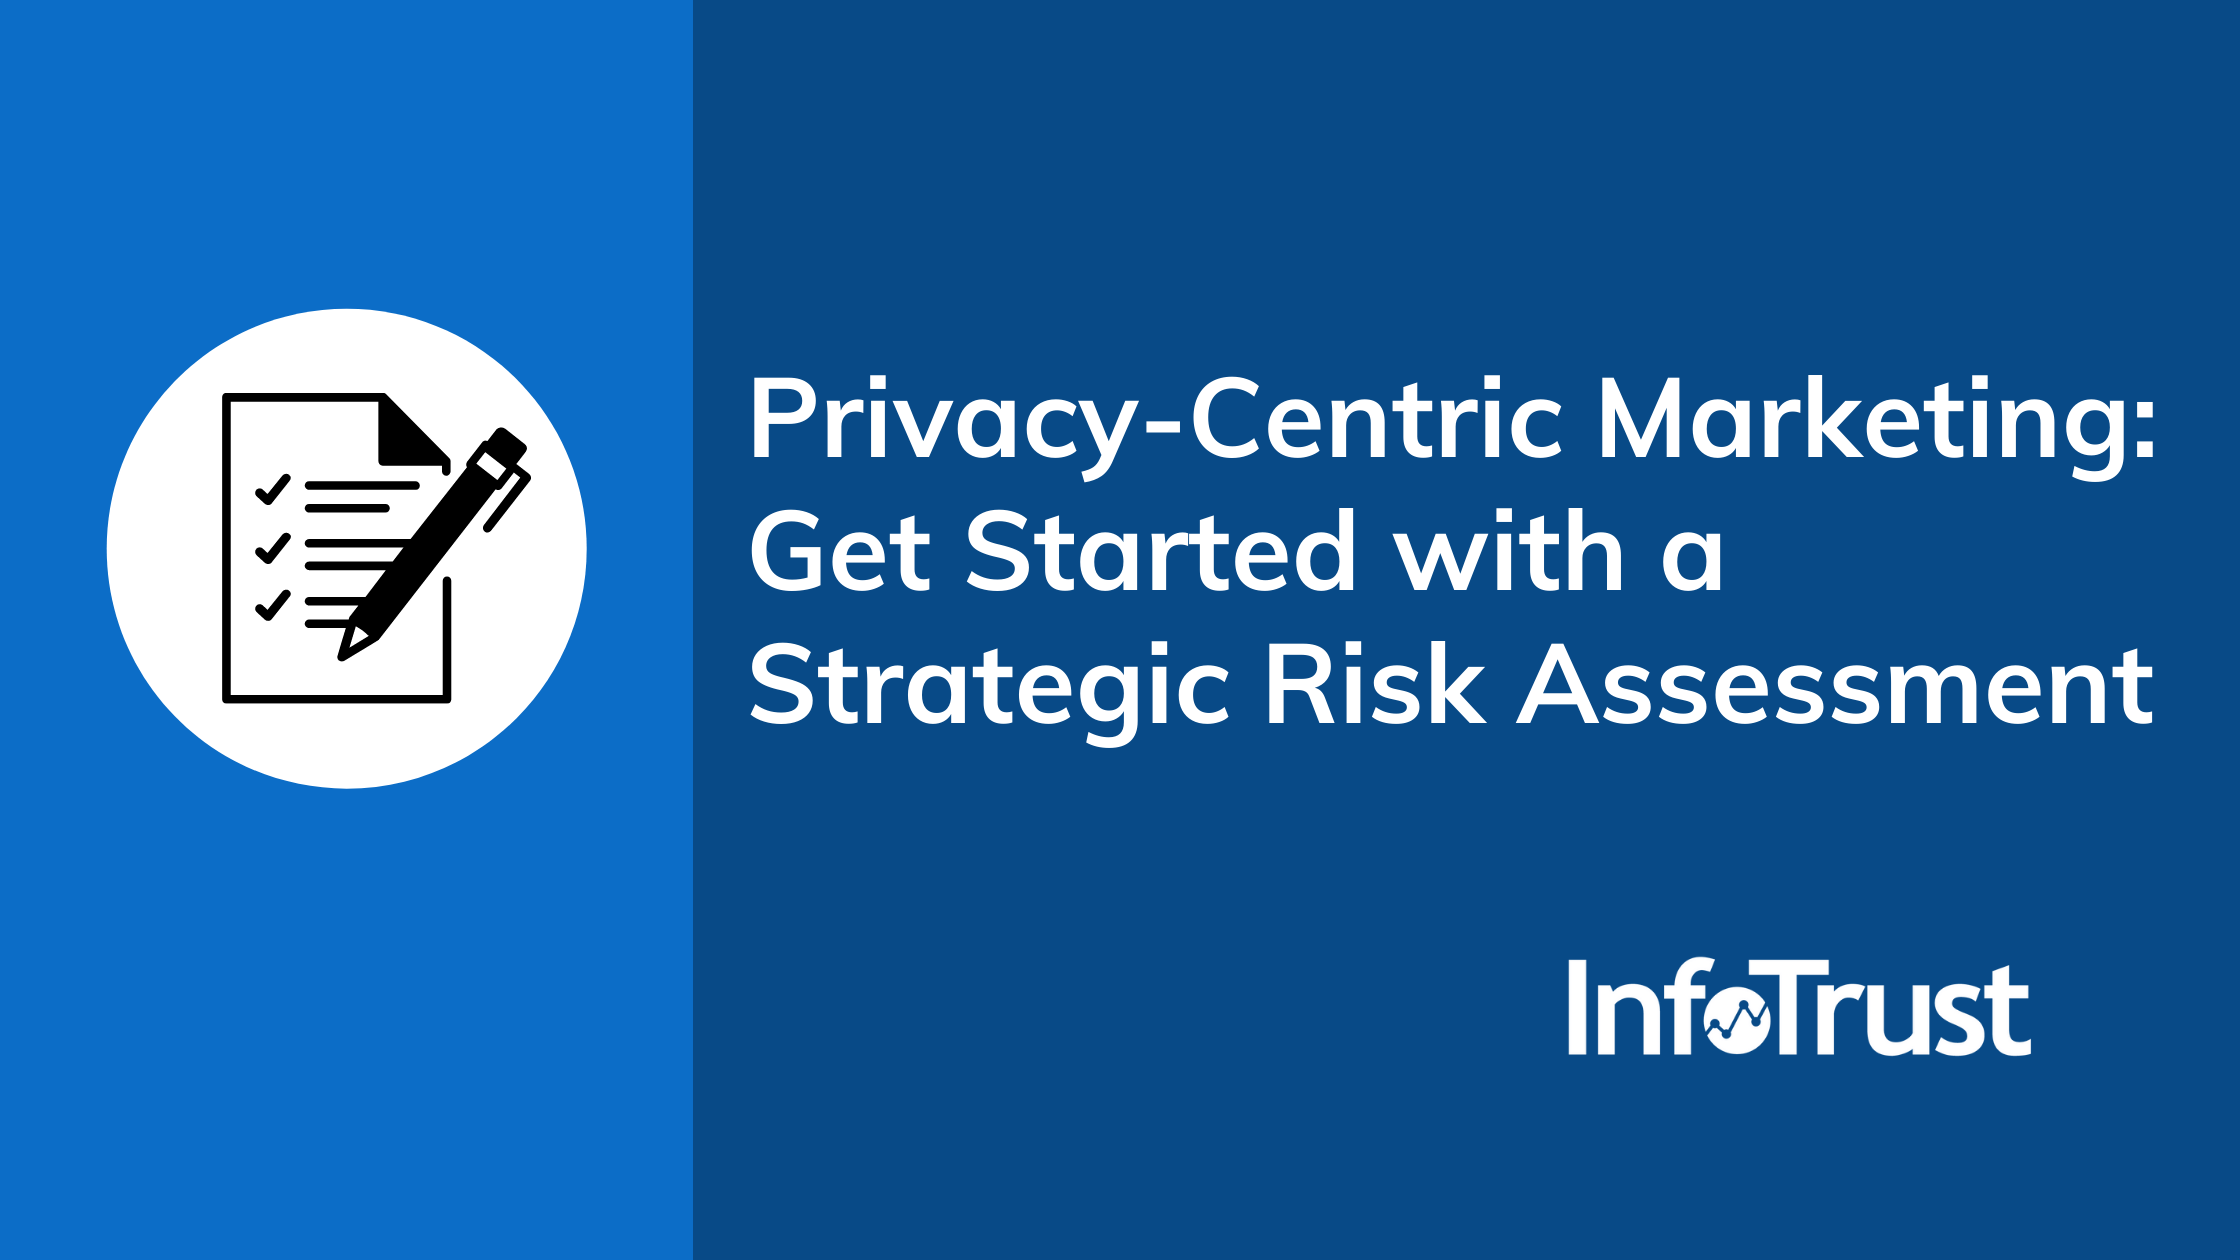 Privacy-Centric Marketing: Get Started with a Strategic Risk Assessment